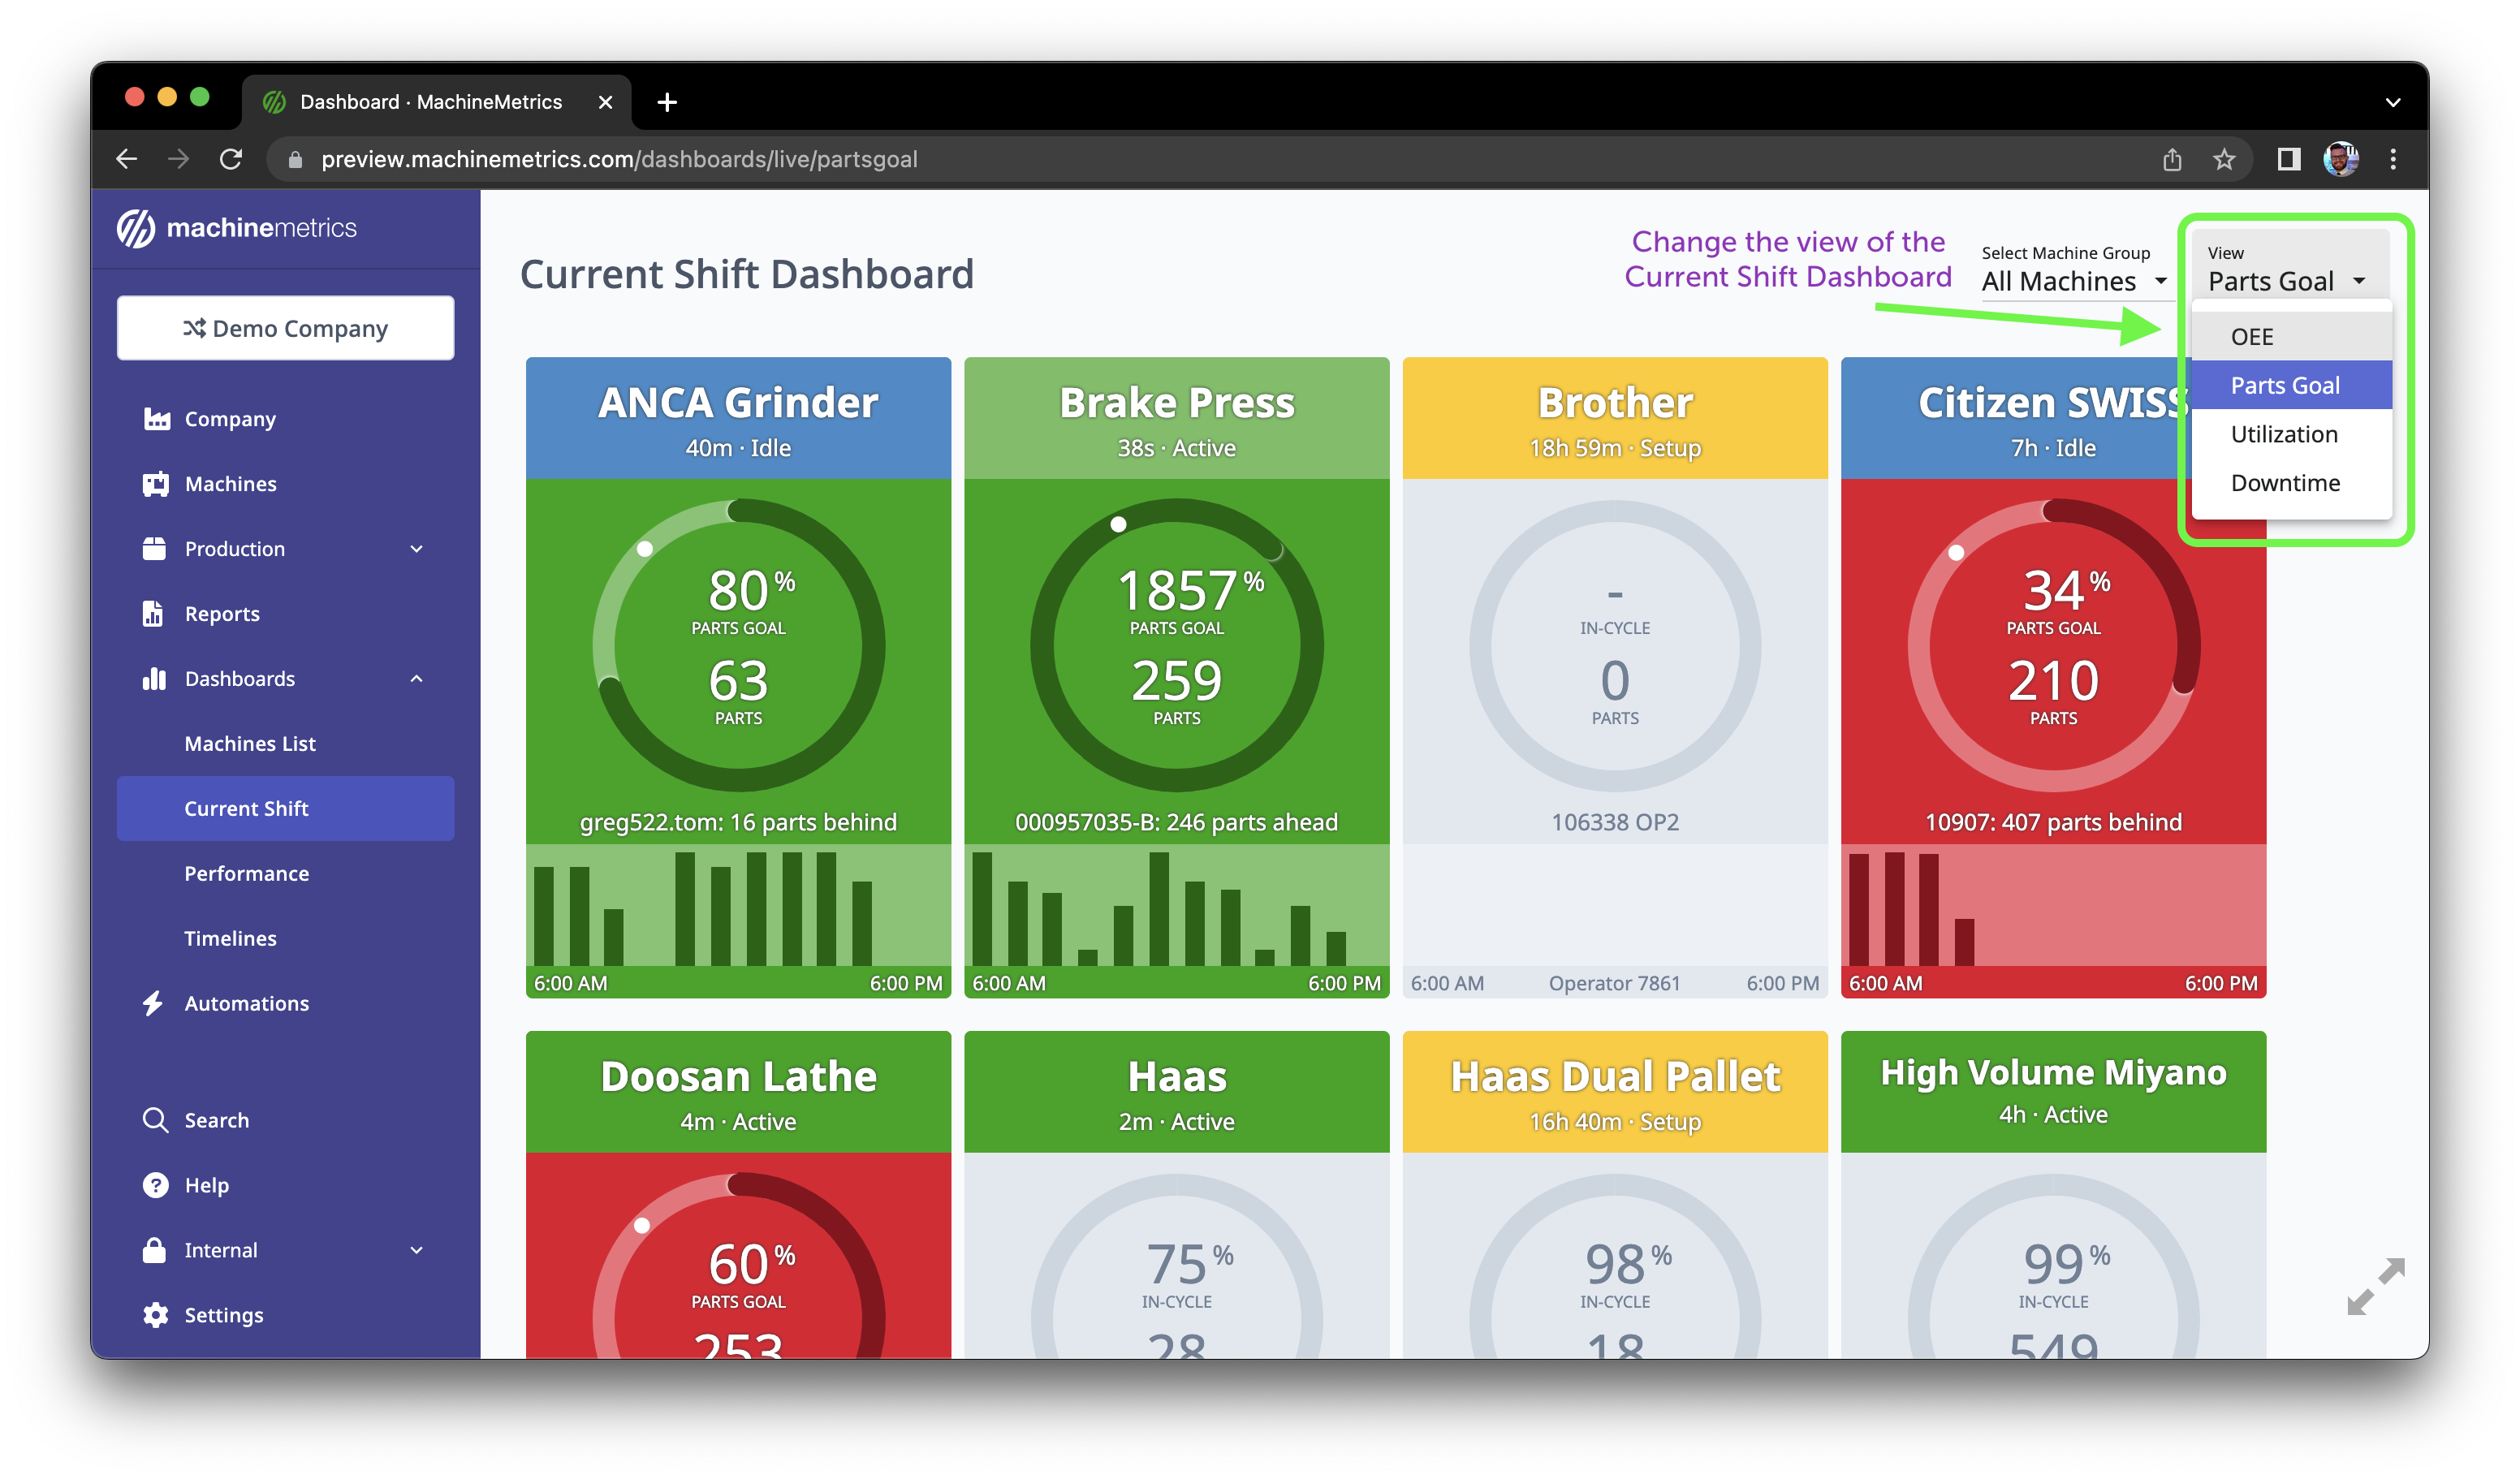 Dashboards-CurrentShift-ChangeView.png